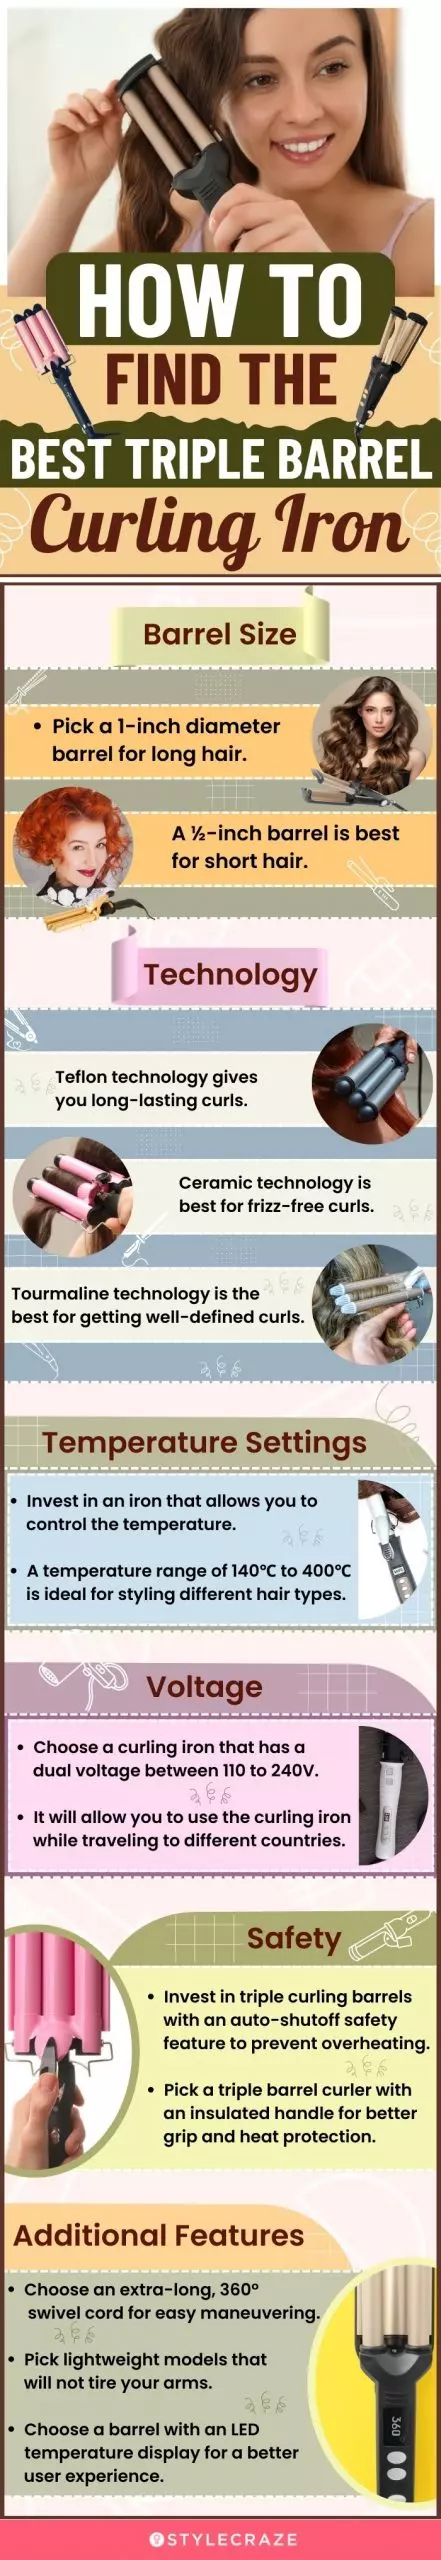 How To Find The Best Triple Barrel Curling Iron (infographic)